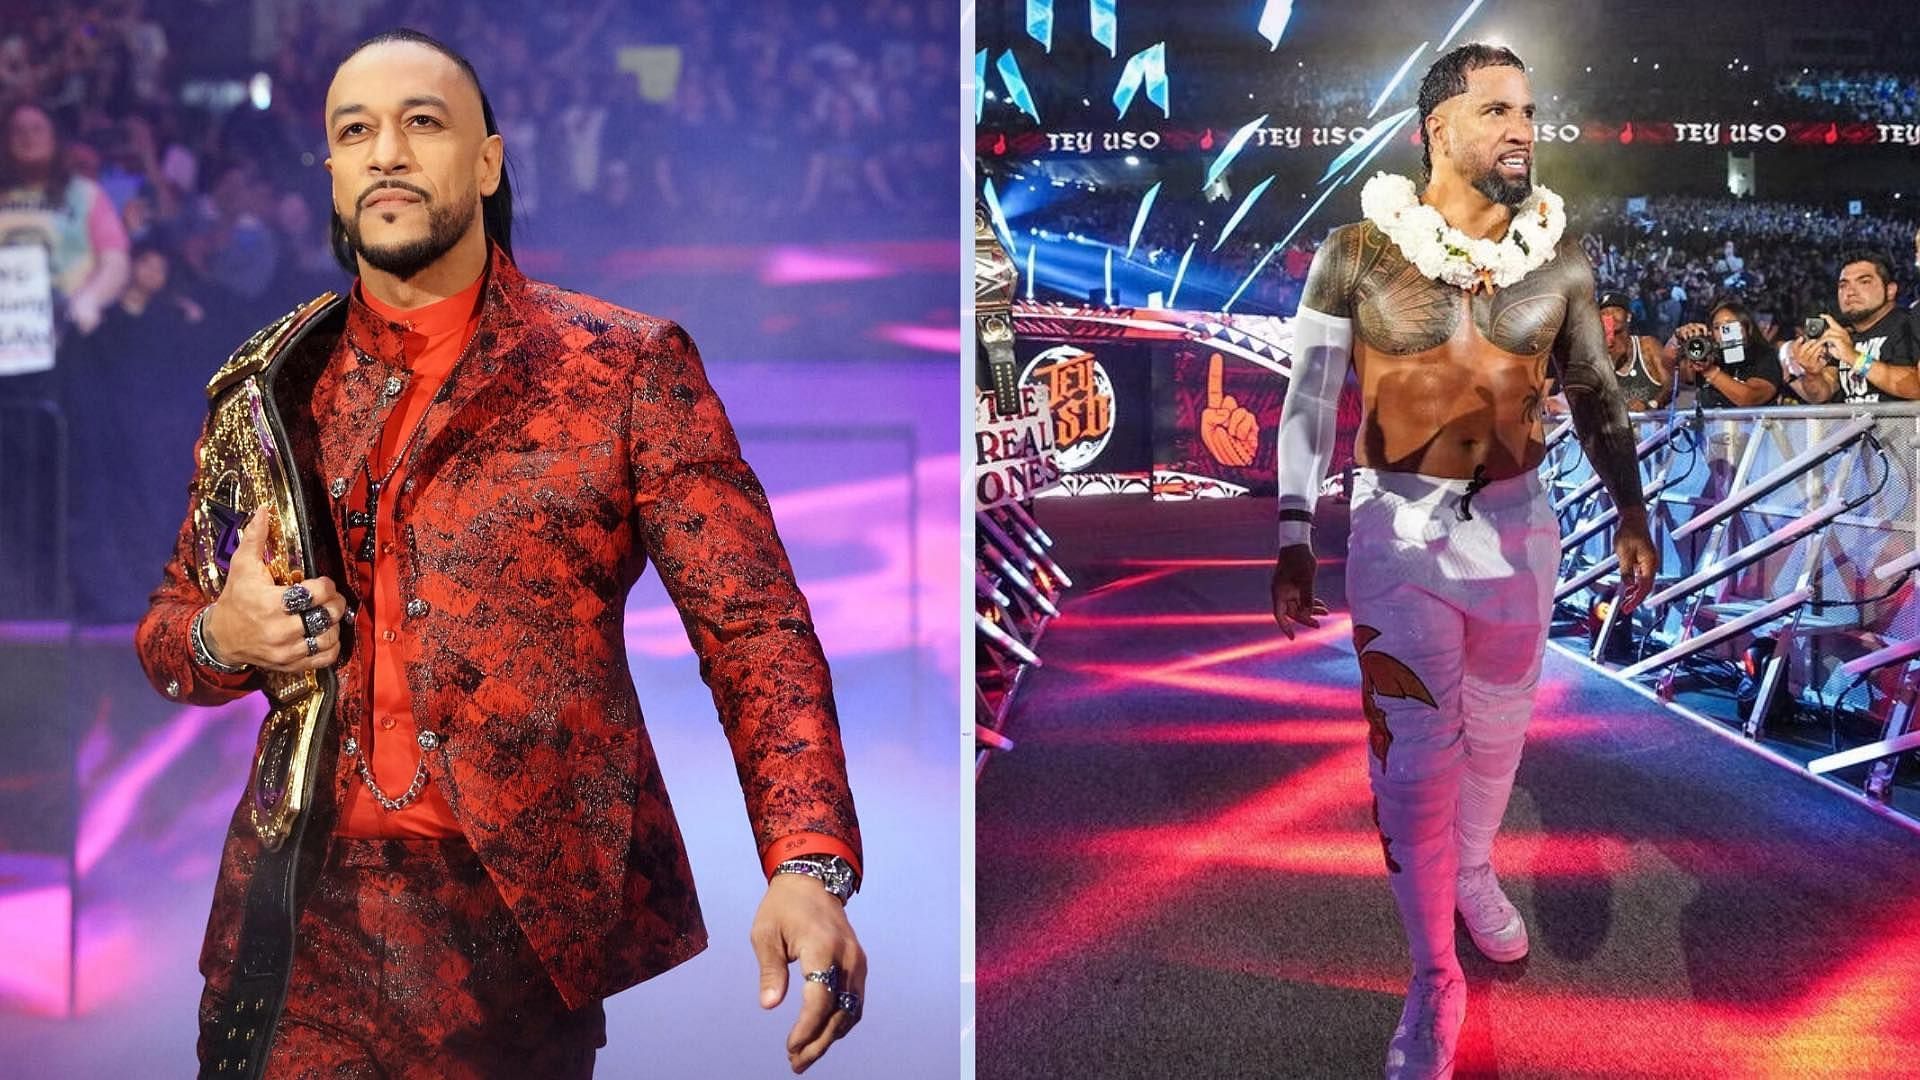 Damian Priest and Jey Uso will soon clash at WWE Backlash France